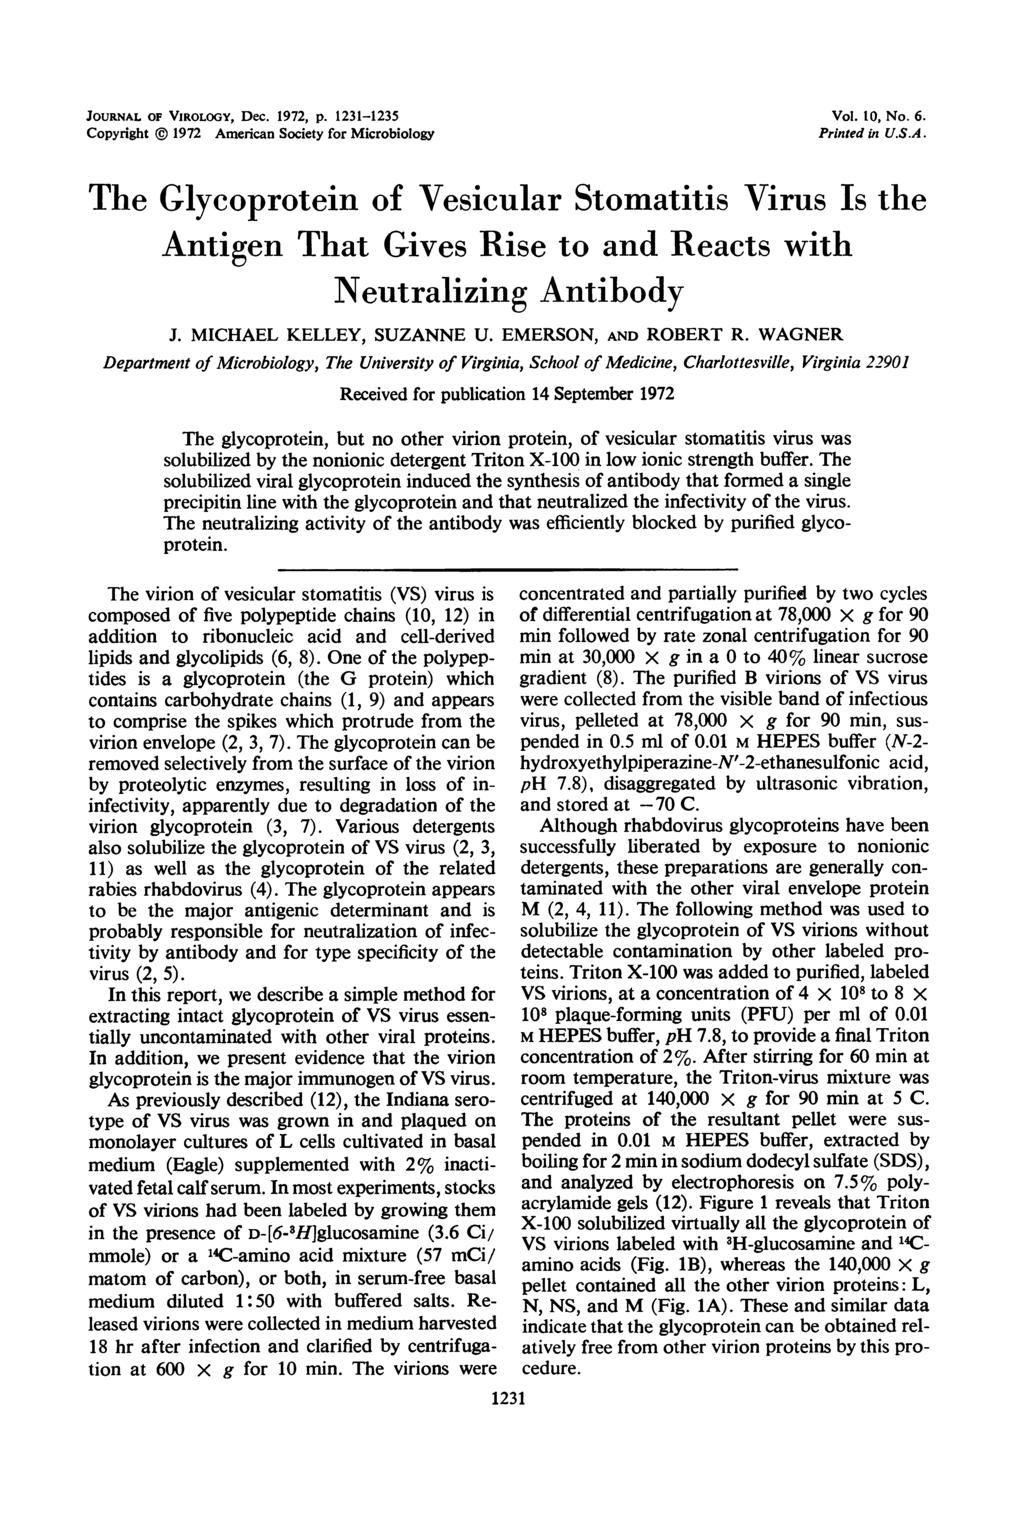 JOURNAL OF VIROLOGY, Dec. 1972, p. 1231-1235 Copyright 1972 American Society for Microbiology Vol. 10, No. 6. Printed in U.S.A. The Glycoprotein of Vesicular Stomatitis Virus Is the Antigen That Gives Rise to and Reacts with Neutralizing Antibody J.